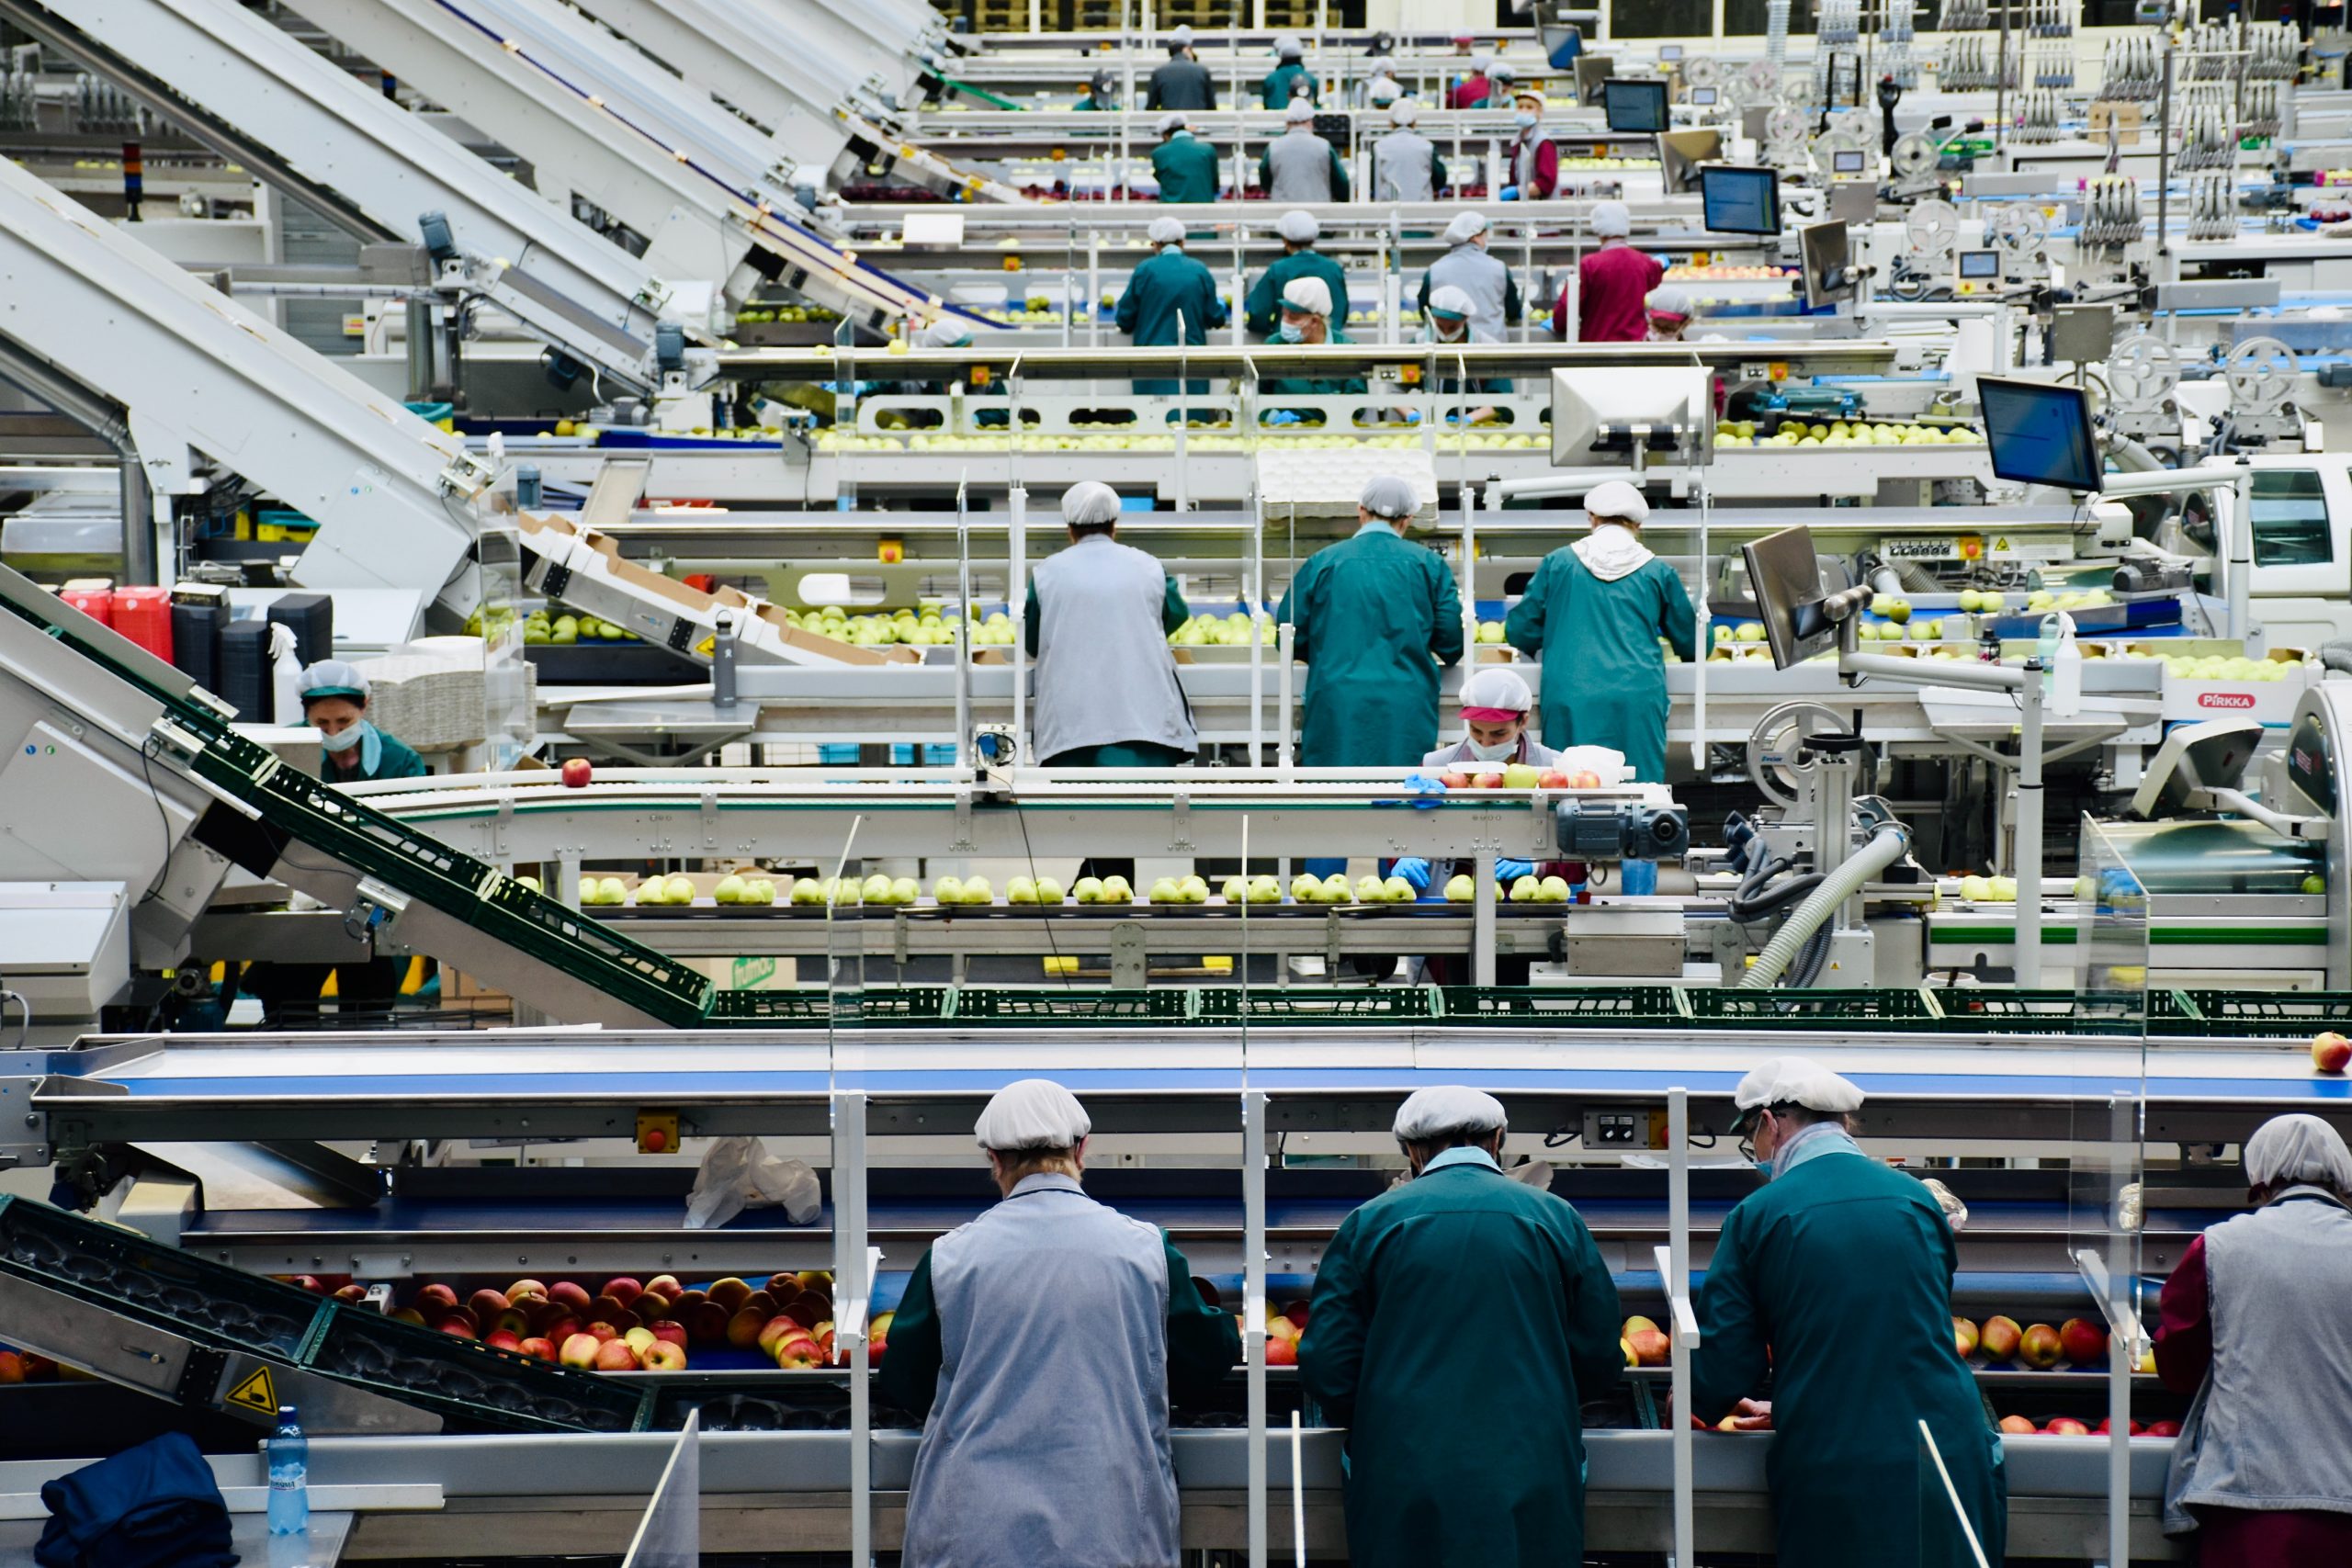 Inside an apple processing company in northern Italy